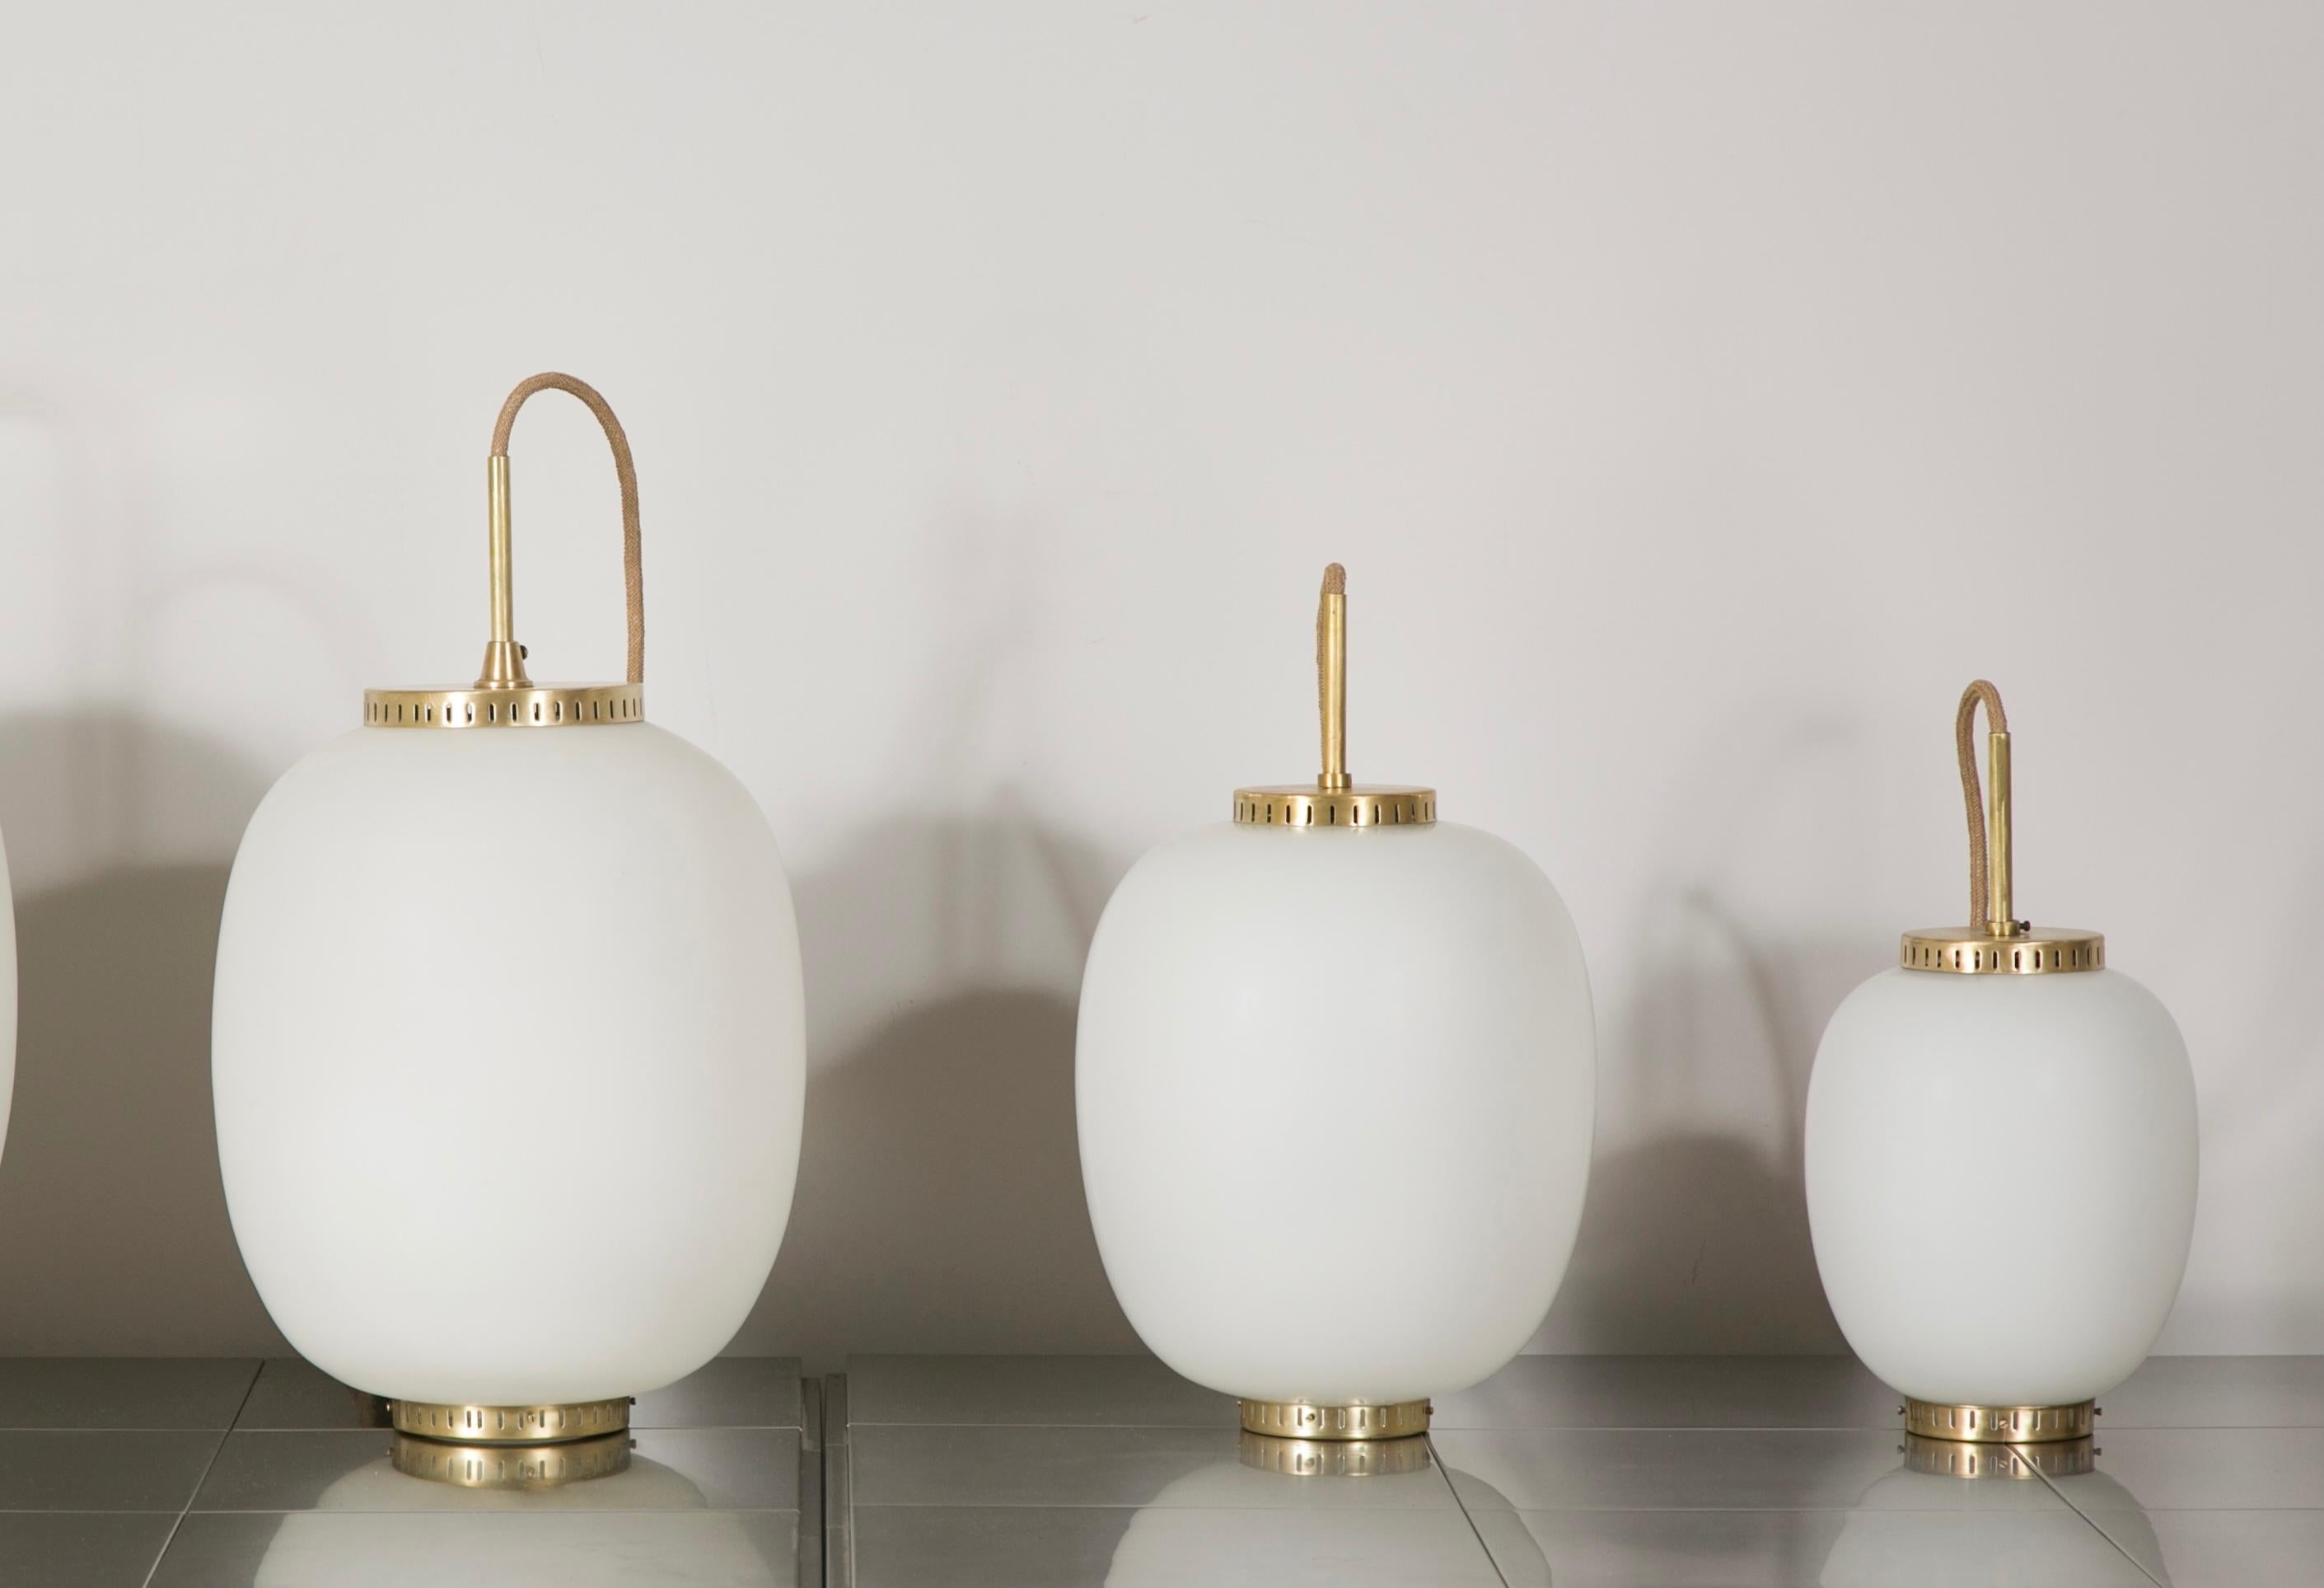 Collection of 9 opaline glass and brass ceiling fixtures.
See dimensions below
Designed by Bent Karlby for Lyfa.
Denmark, late 1950s.

Dimensions: (Height of the opaline + top and bottom brass discs )
Medium (3 items available) H 11.8 in. (30